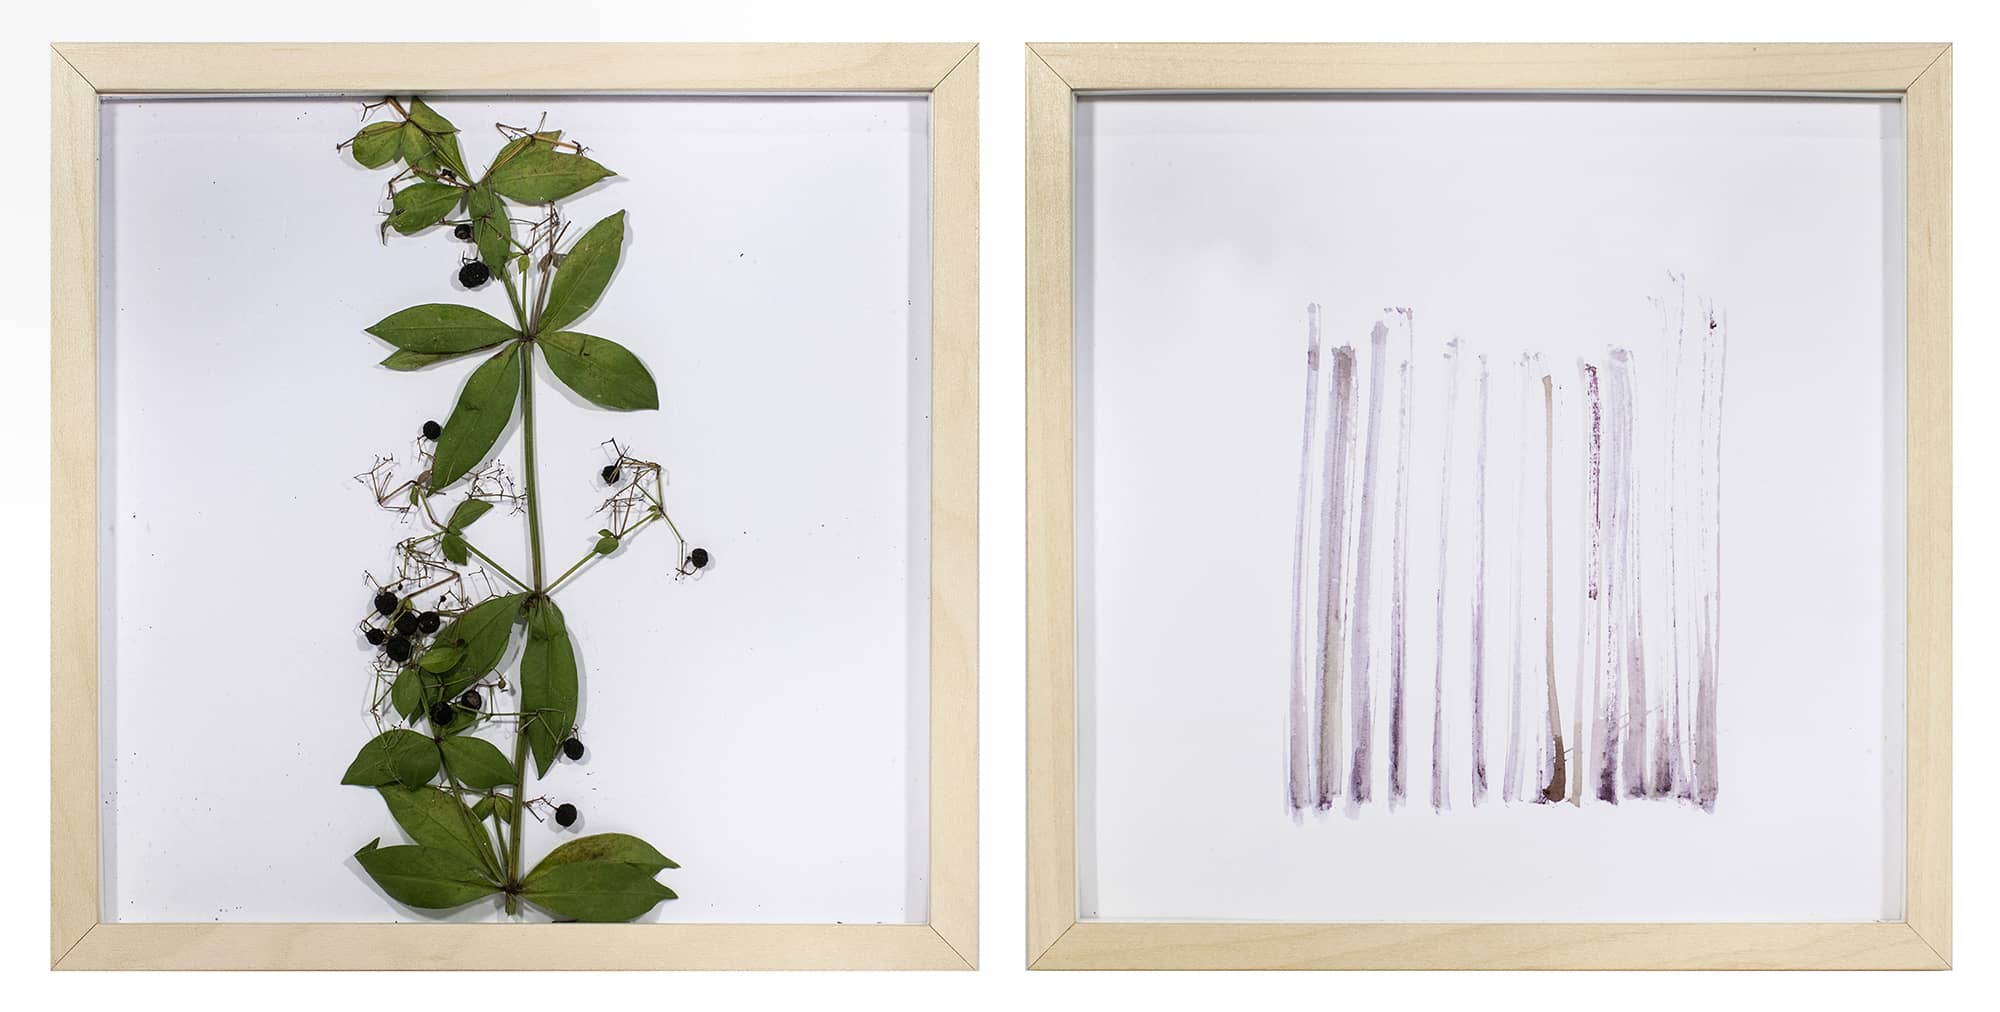 'Rubia Peregrina, assemblage (plant and organic pigment on paper). Artwork by Francesca Virginia Coppola